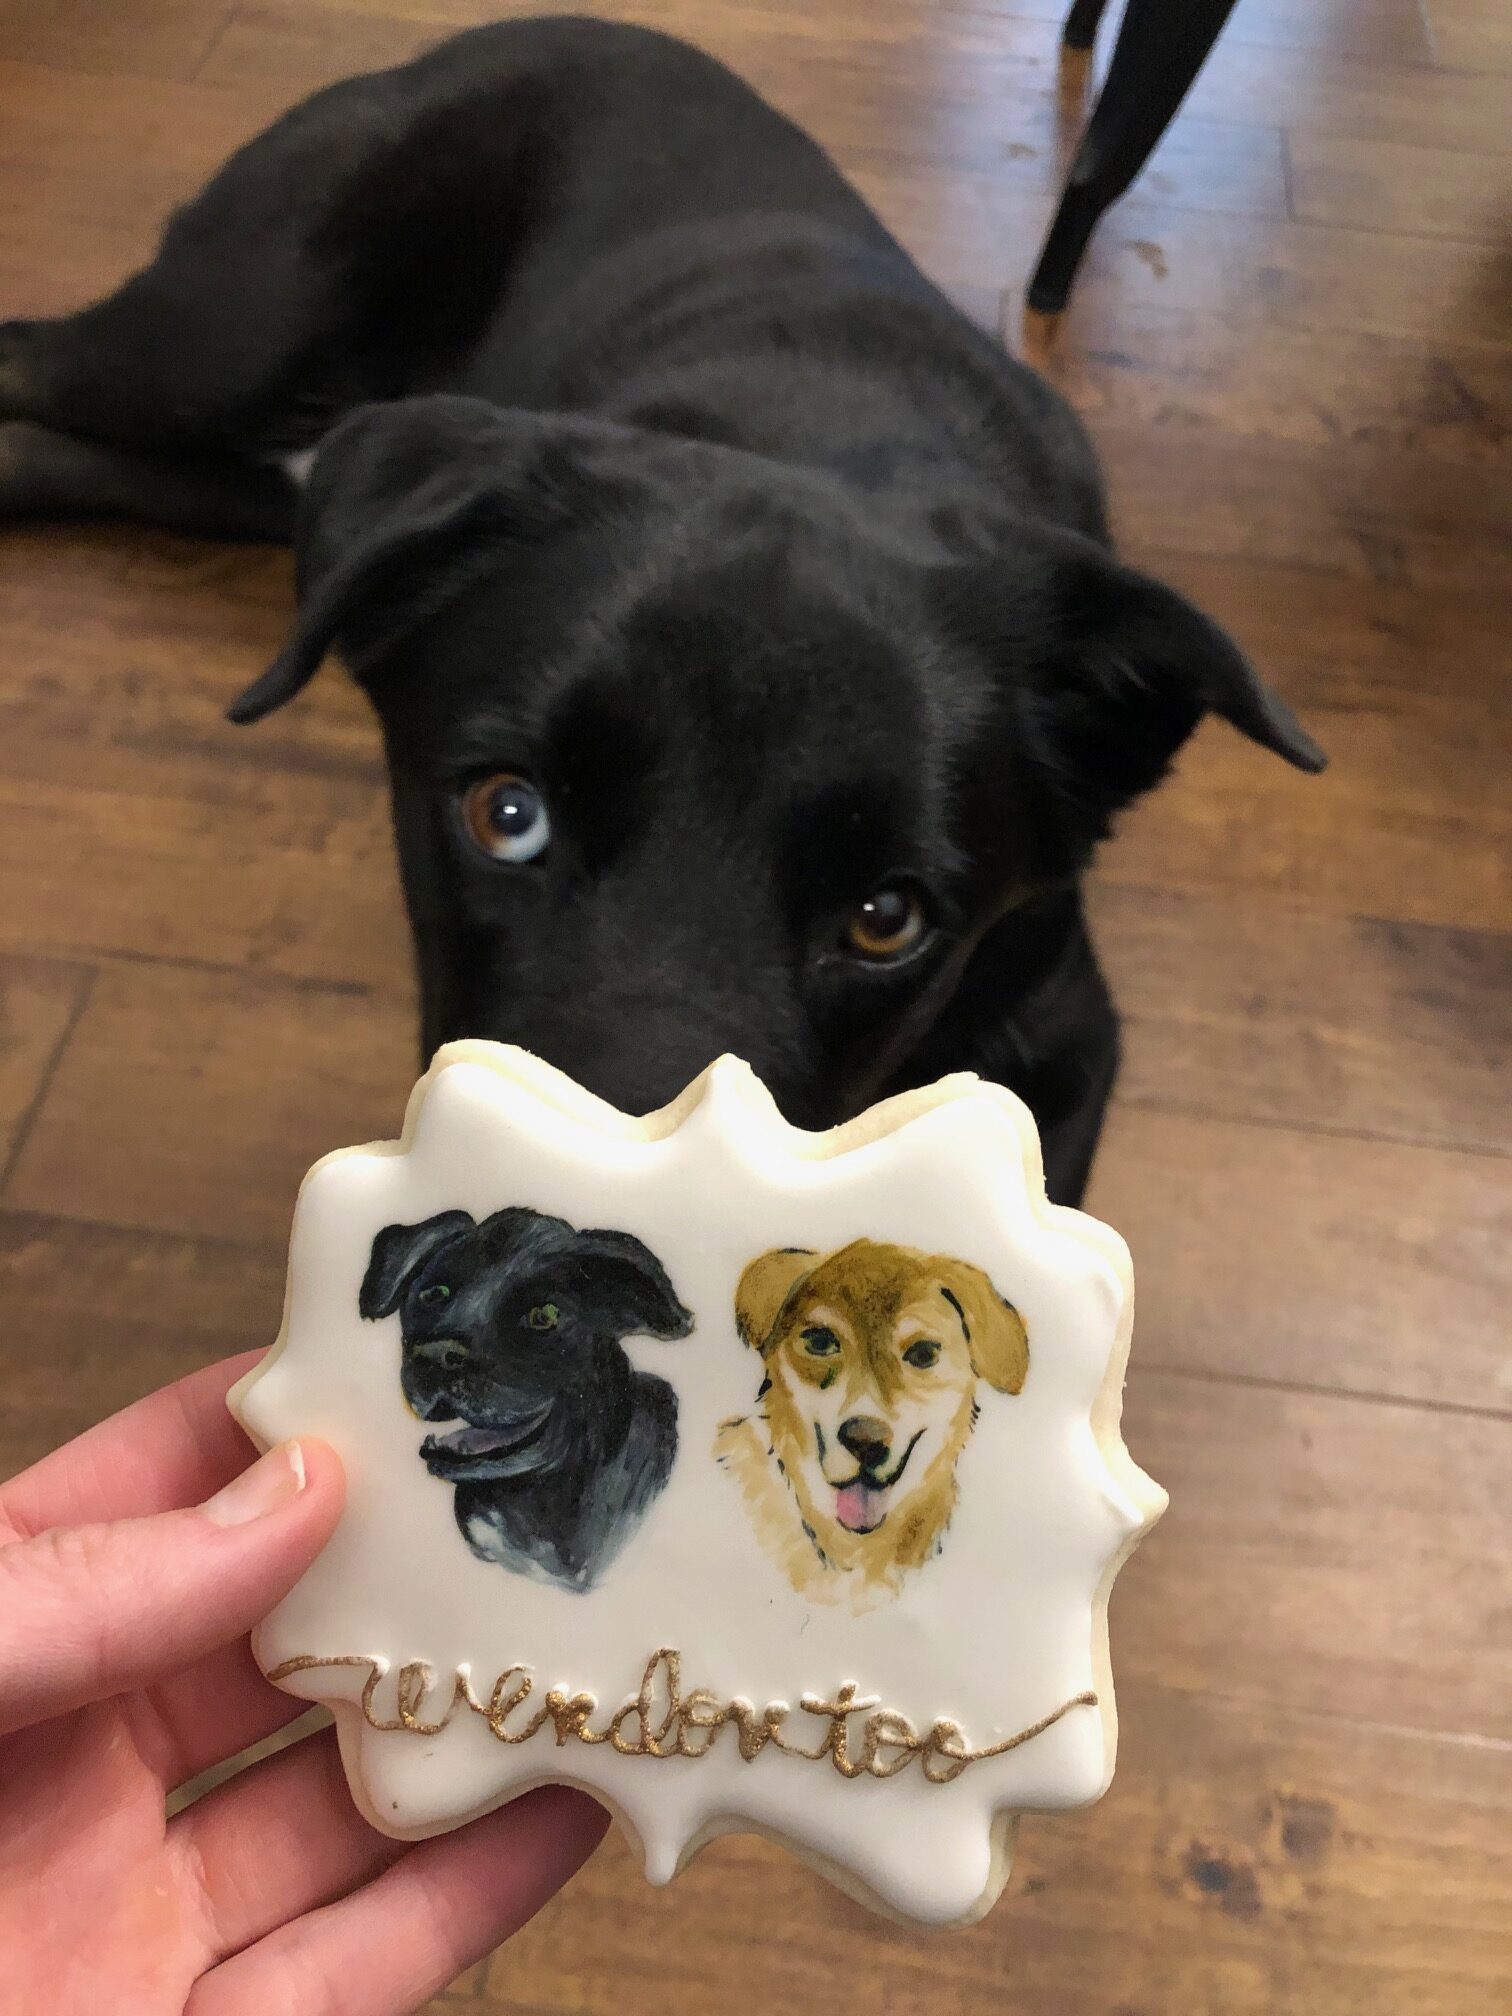 Bentley and a cookie